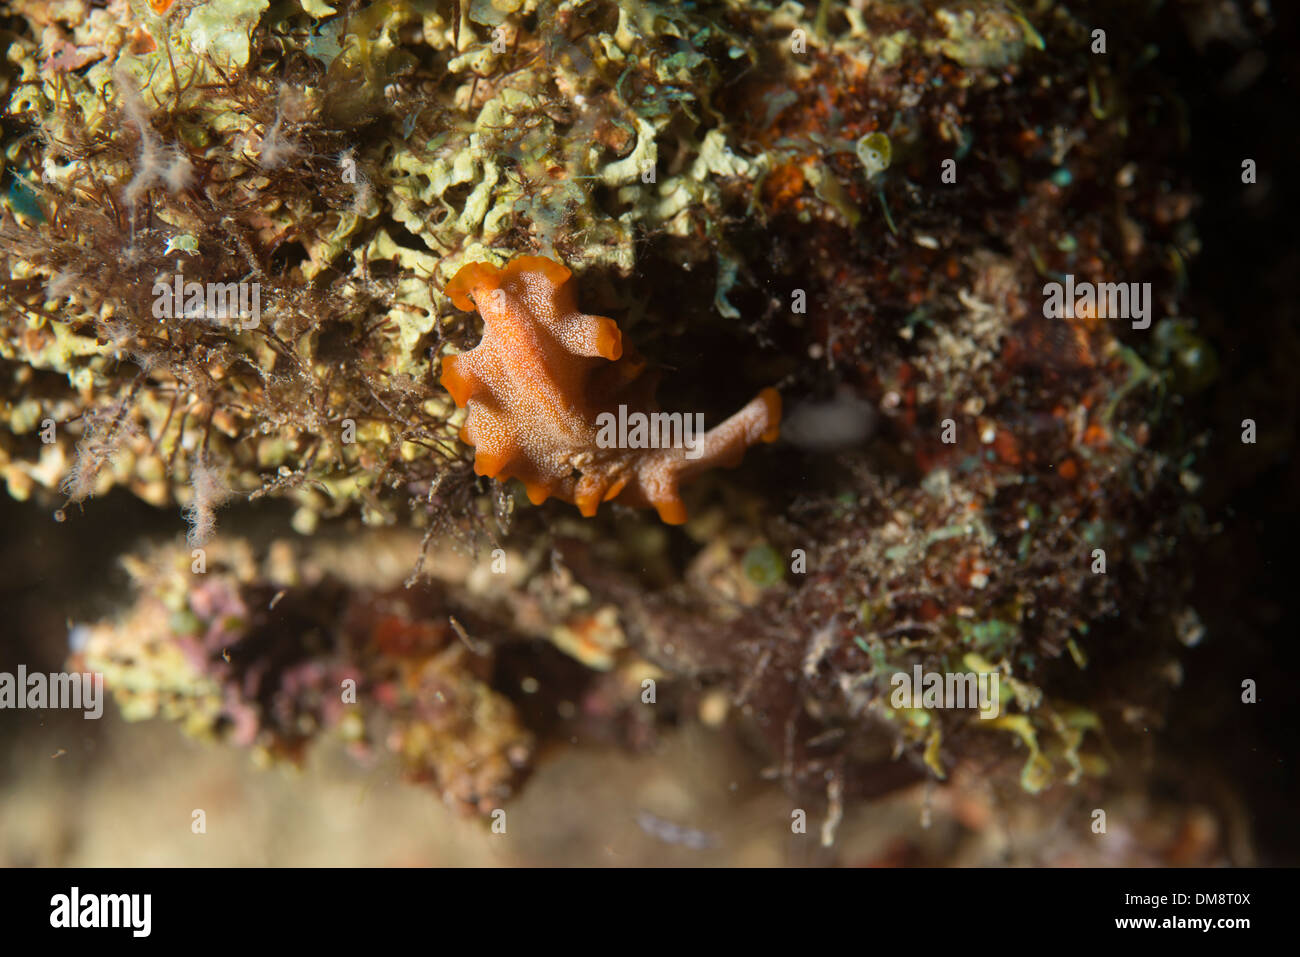 Flatworm crawling over a coral Stock Photo